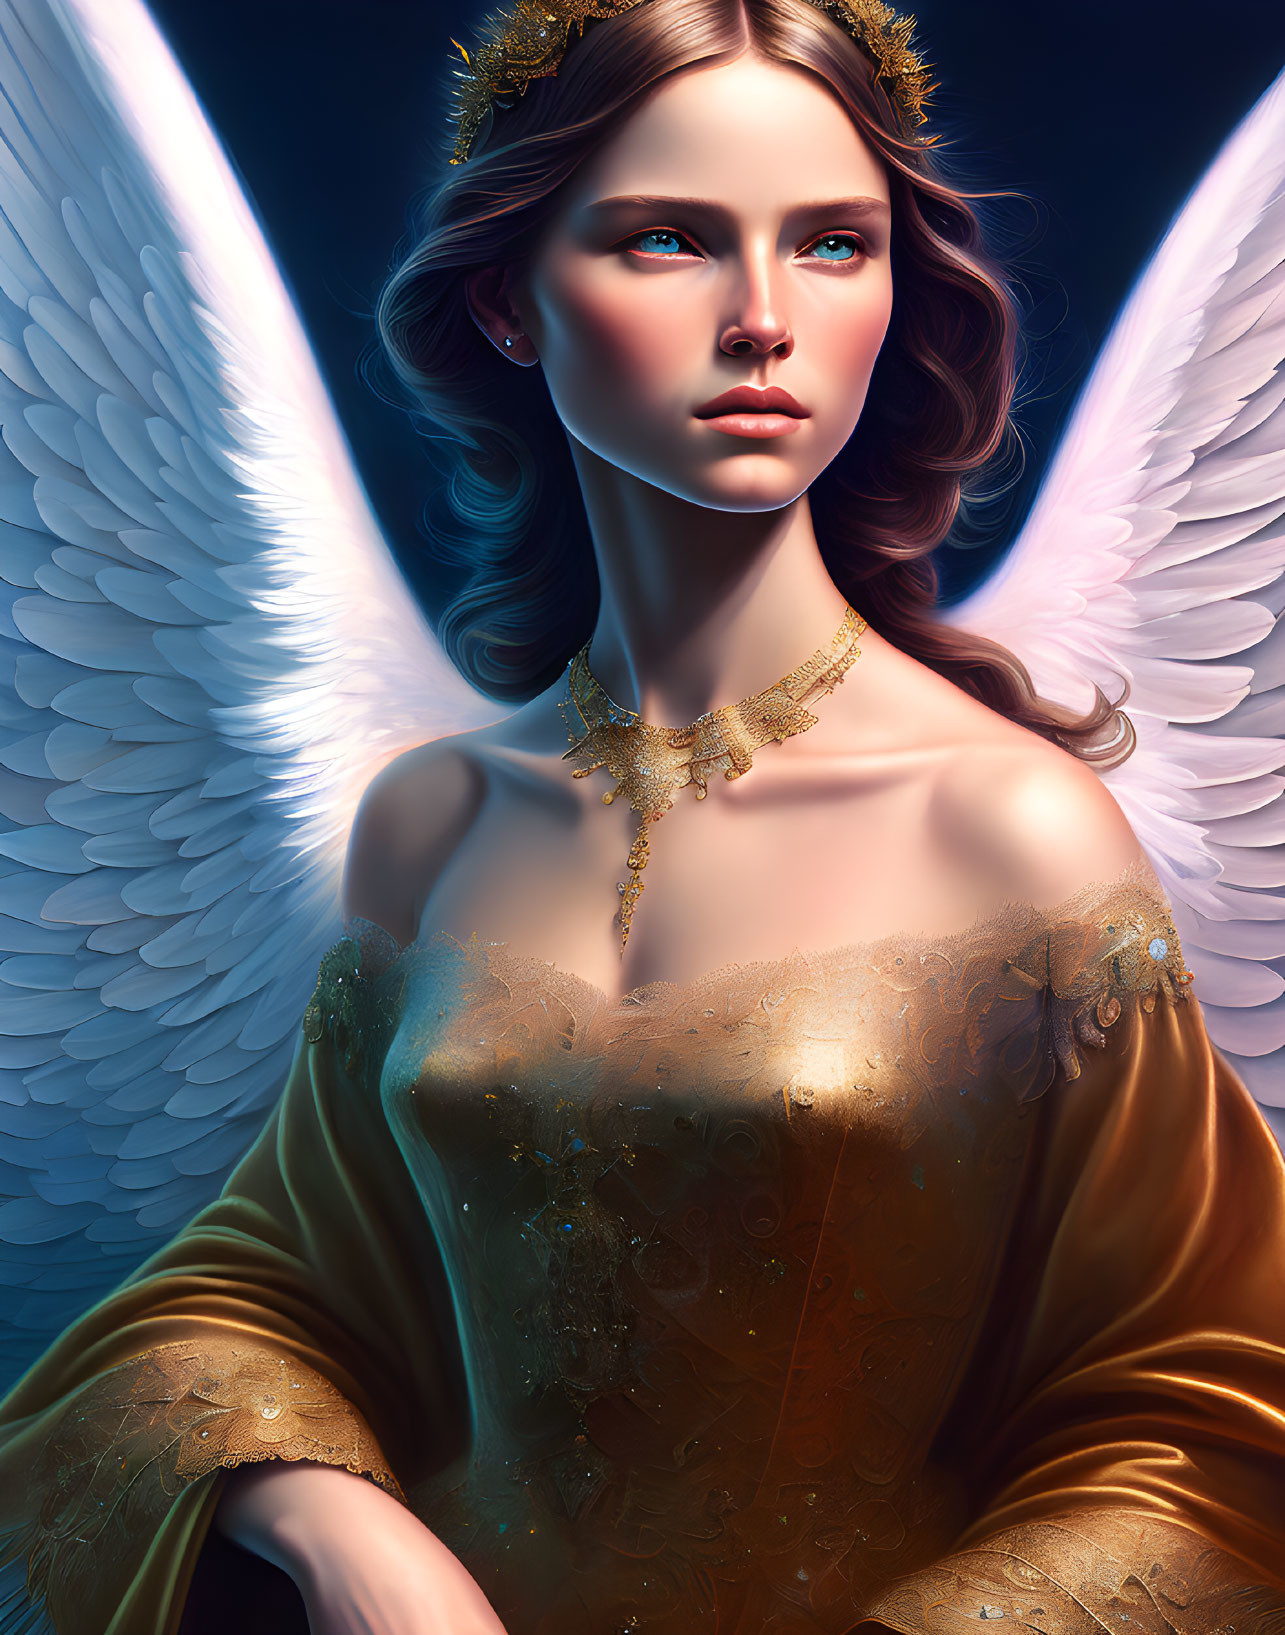 Digital artwork: Angelic figure with glowing wings and golden gown on blue backdrop